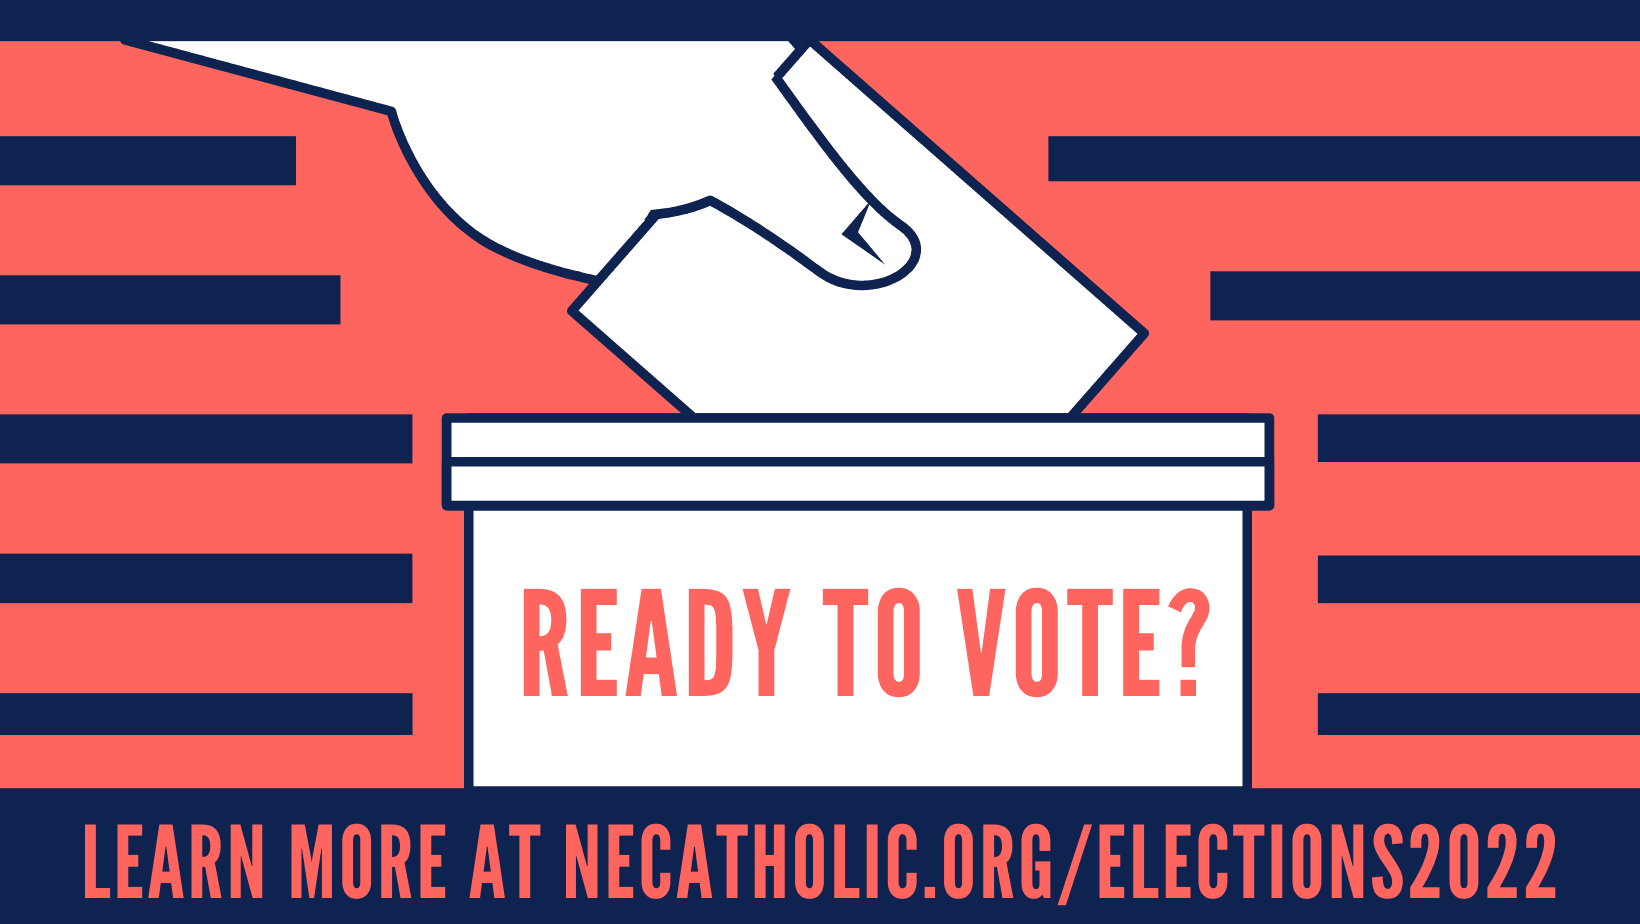 Are You Ready to Vote?